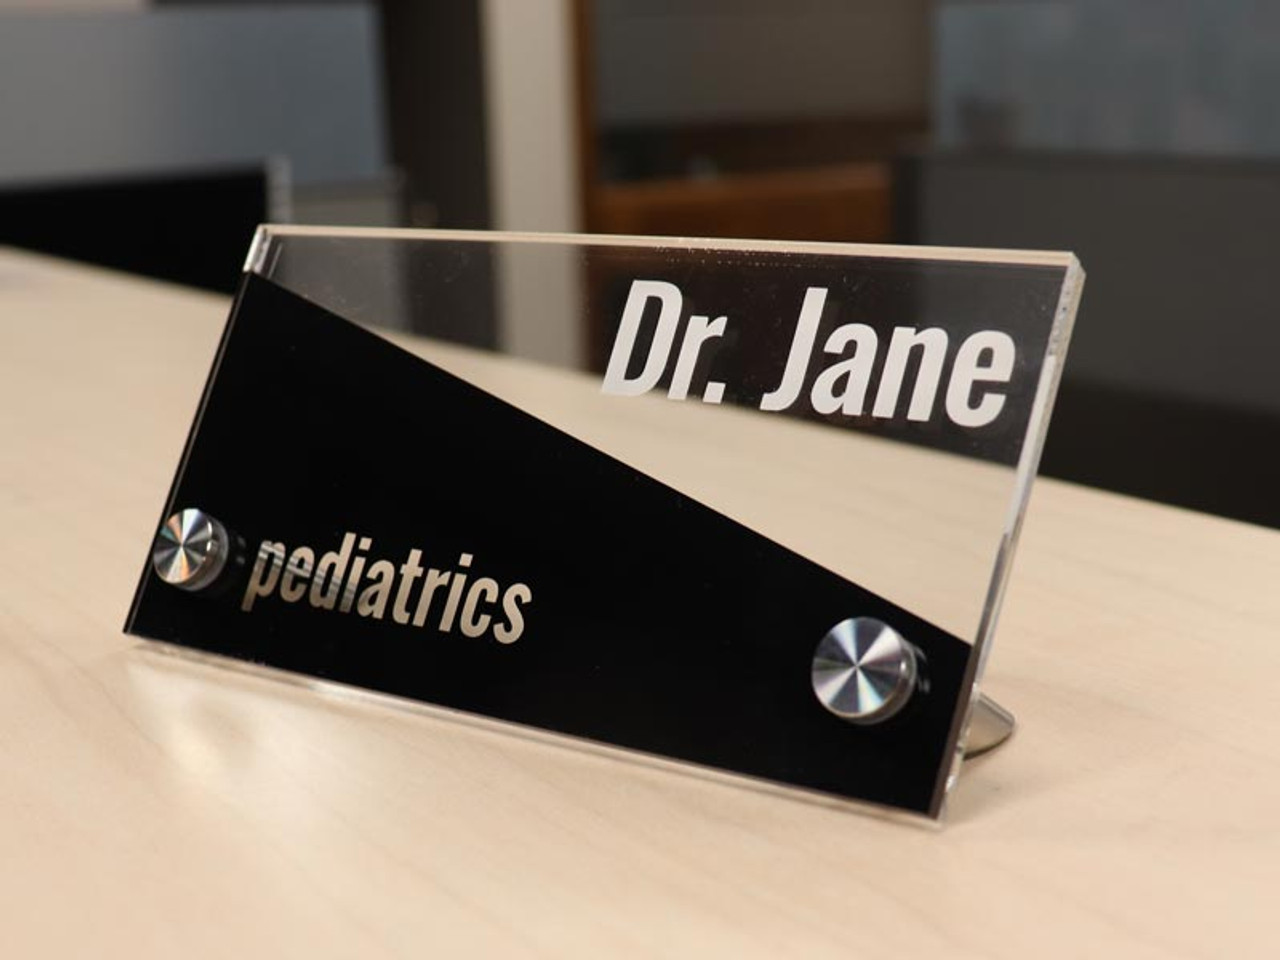 3 Plate Colors And 31 Insert Colors Personalized Office Desk Name Plate & Sign